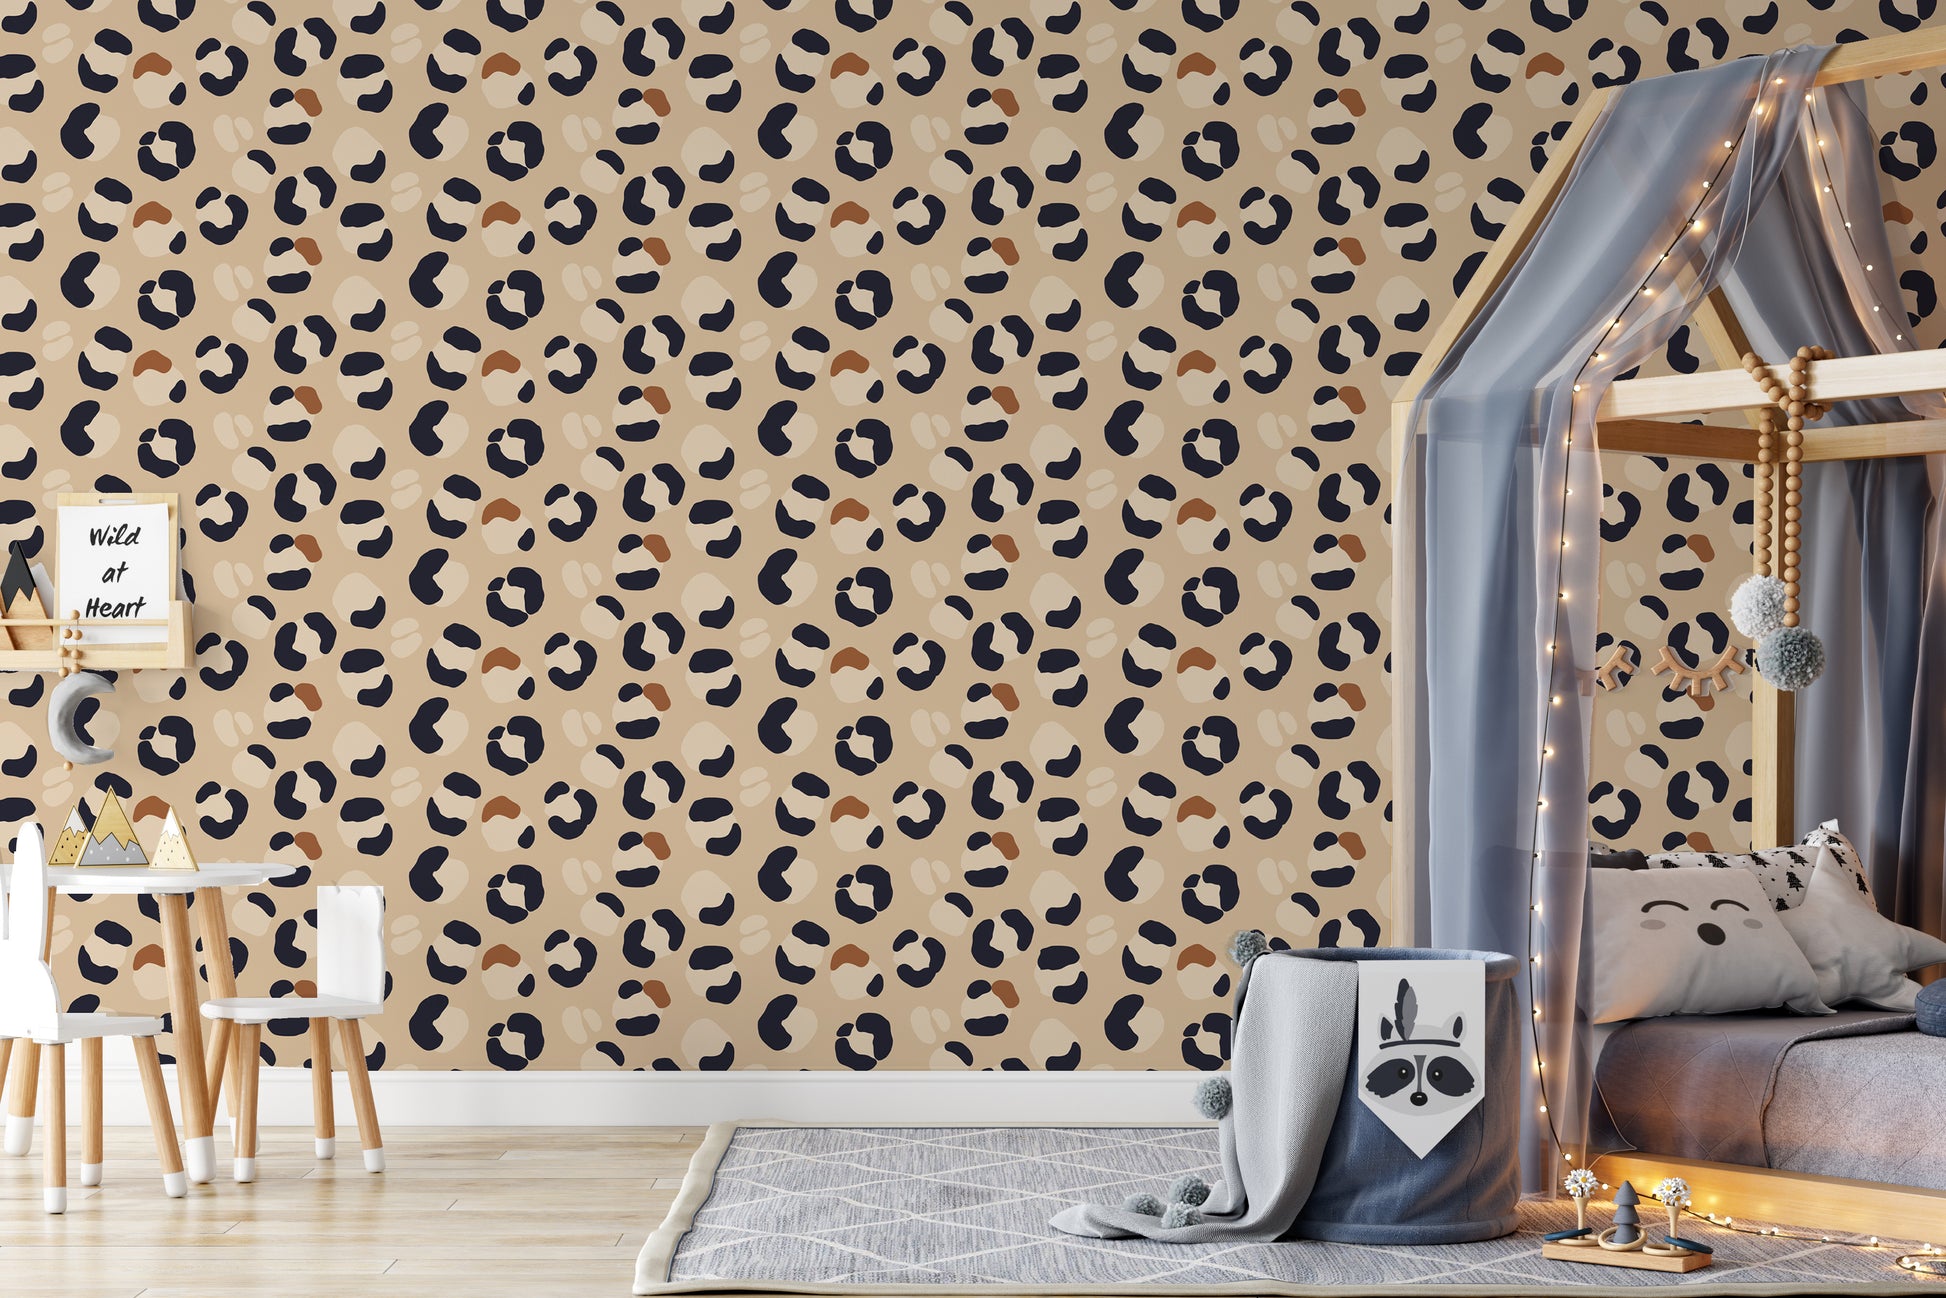 Leopard Print Peel And Stick Removable Wallpaper